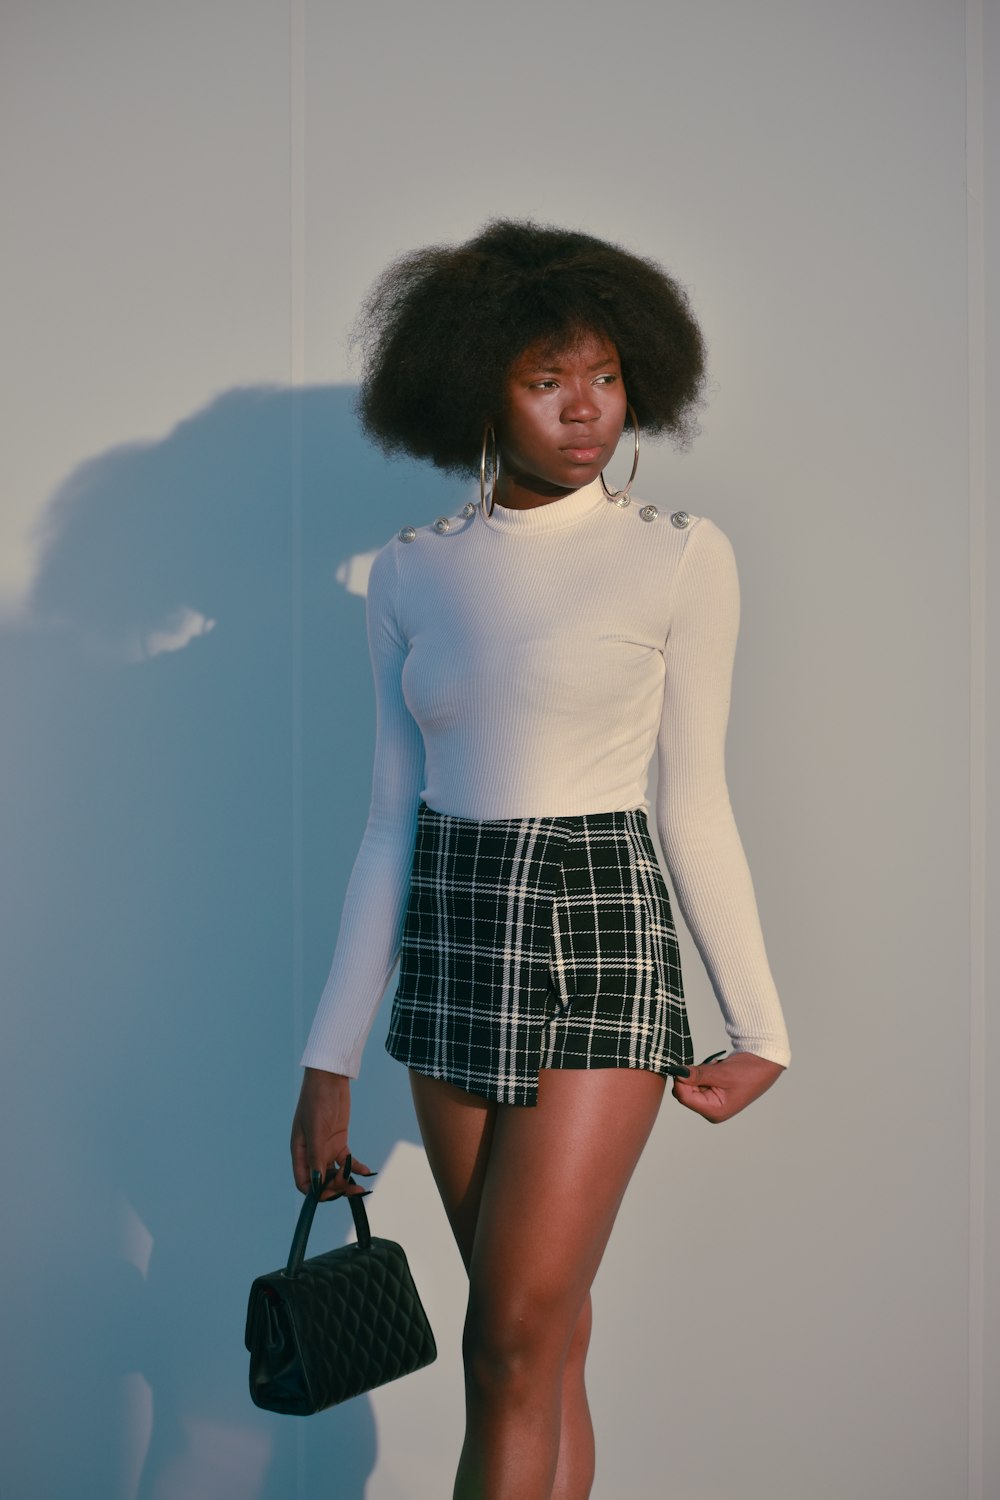 a woman in a white shirt and plaid skirt